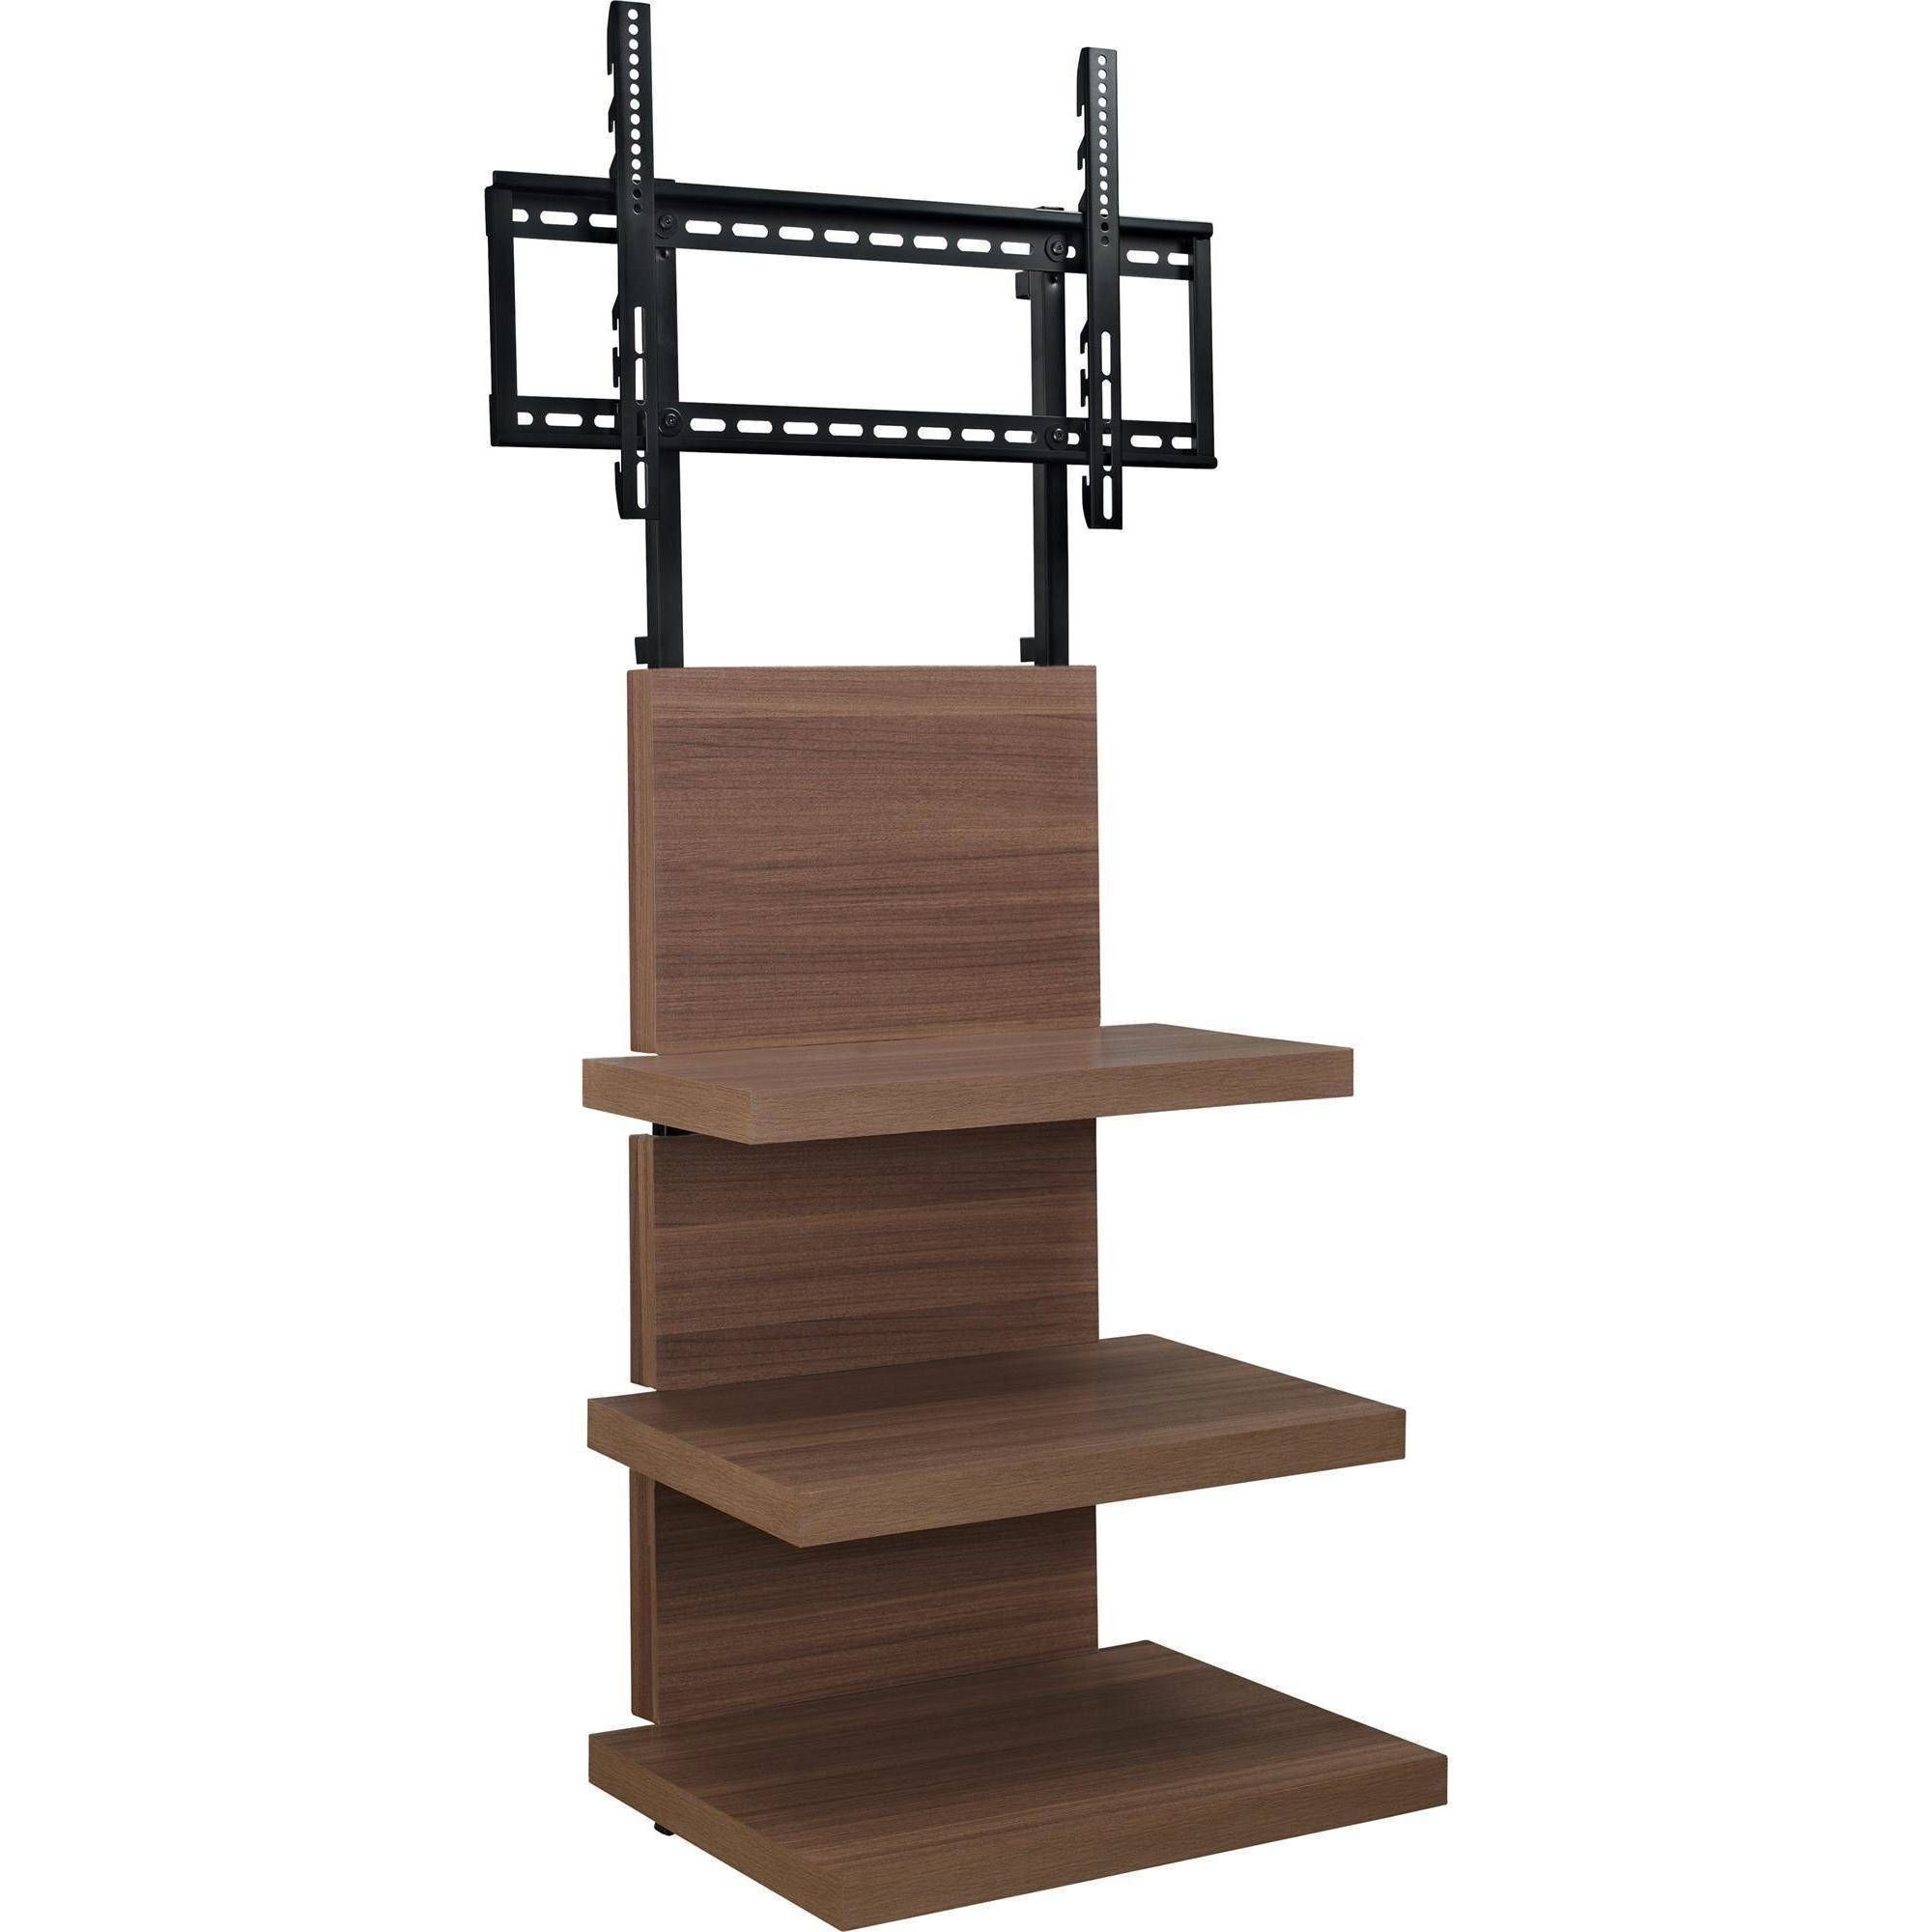 Altra Wall Mount Tv Stand With 3 Shelves, For Tvs Up To 60" | Ebay Within Tv Stand With Mount (View 11 of 15)